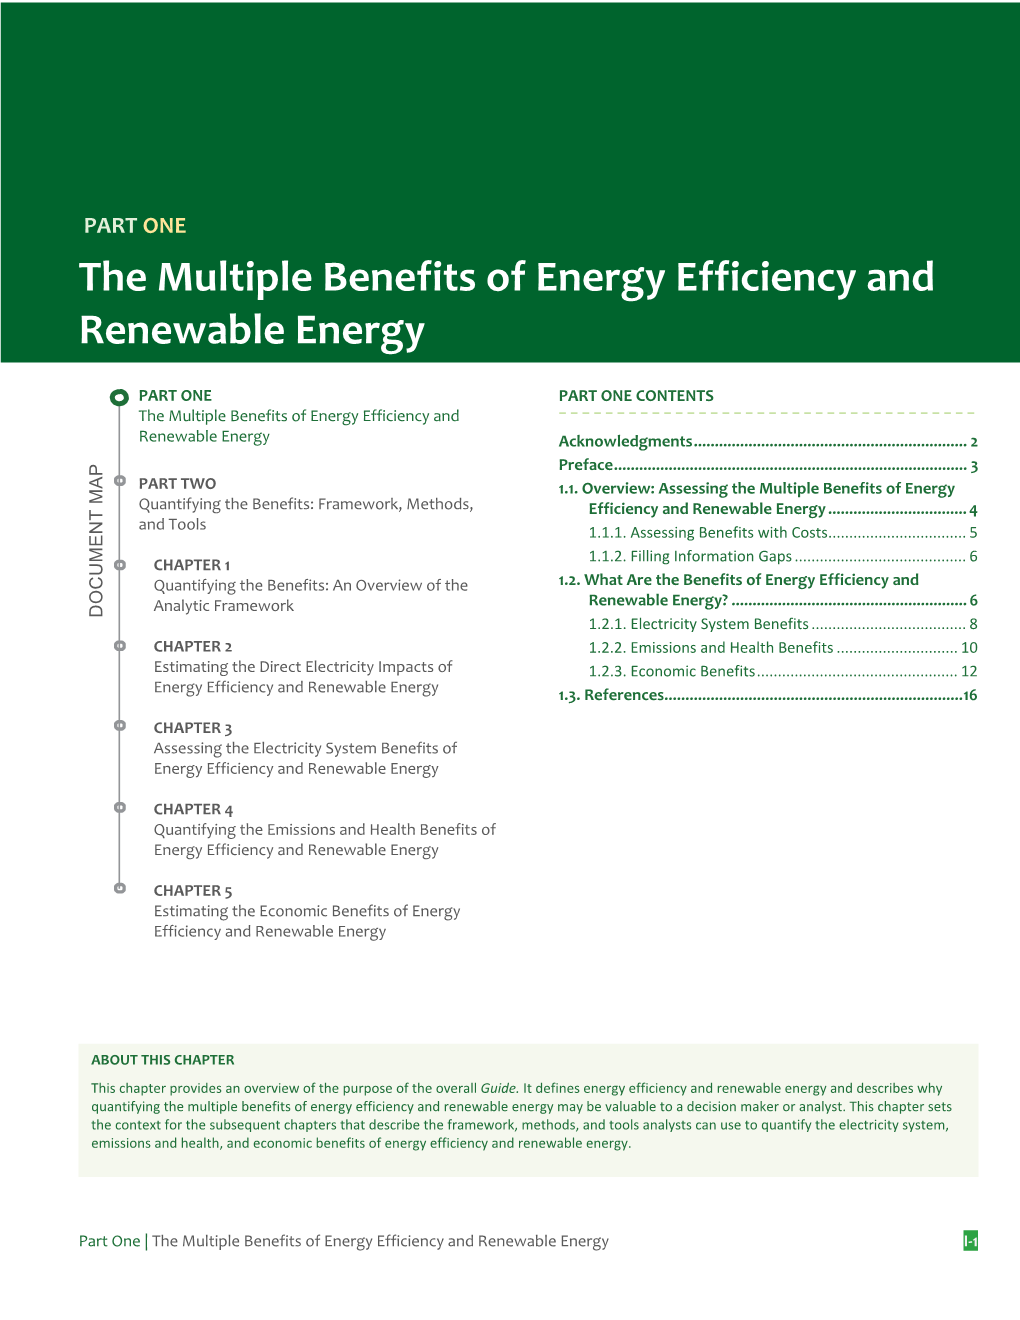 Quantifying the Multiple Benefits of Energy Efficiency and Renewable Energy PART ONE the Multiple Benefits of Energy Efficiency and Renewable Energy